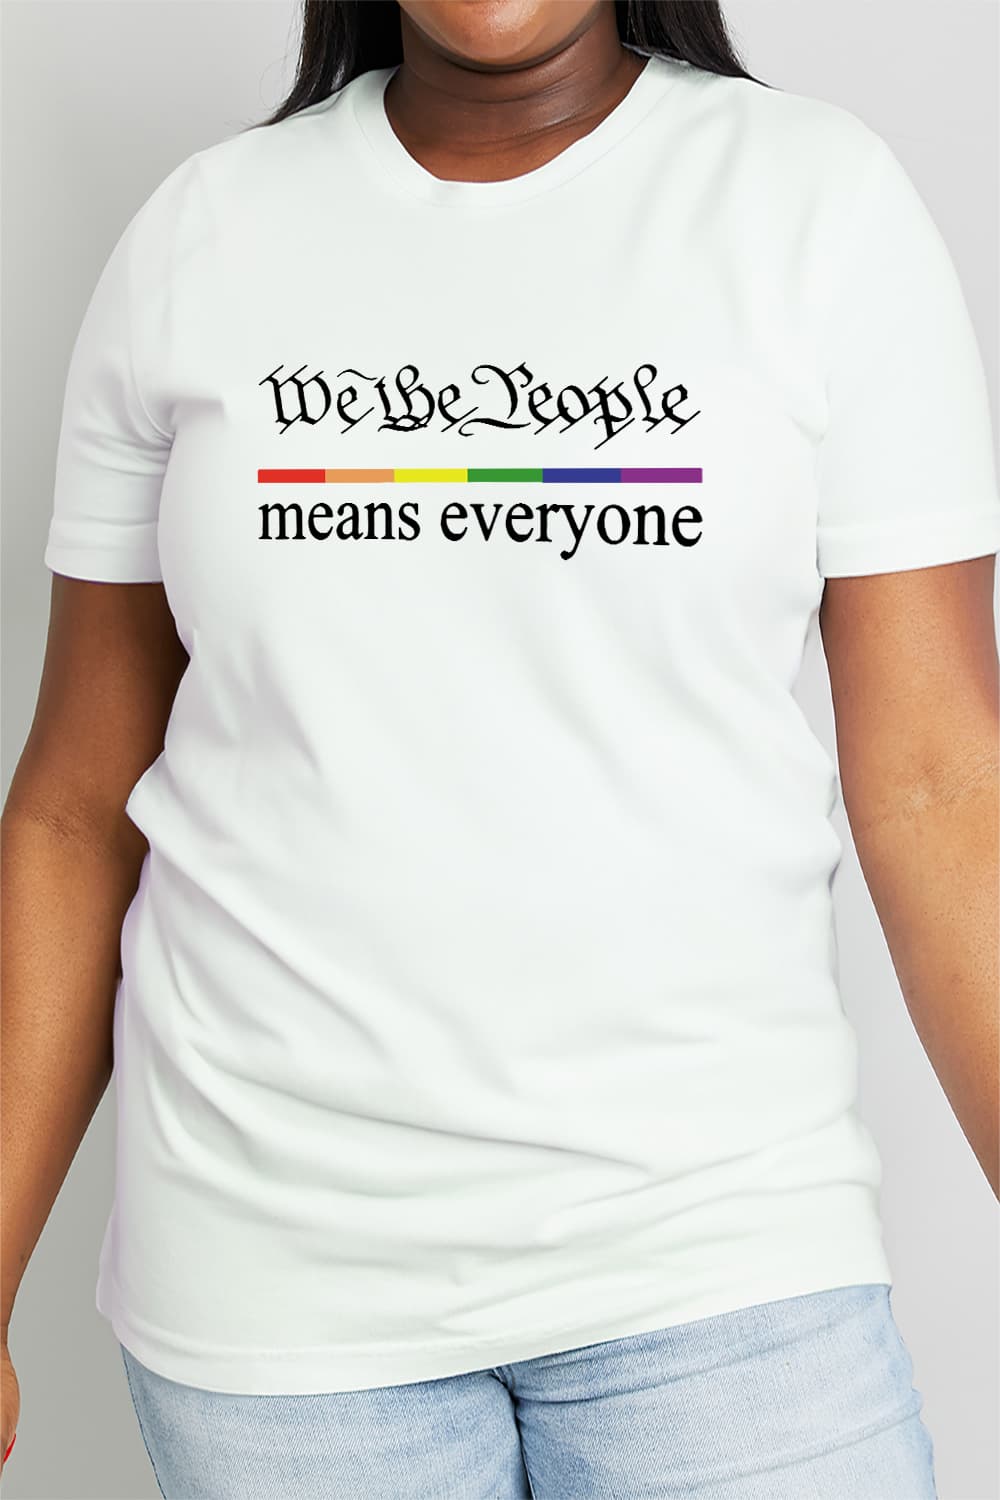 Regular & Plus Size MEANS EVERYONE Graphic Cotton Tee